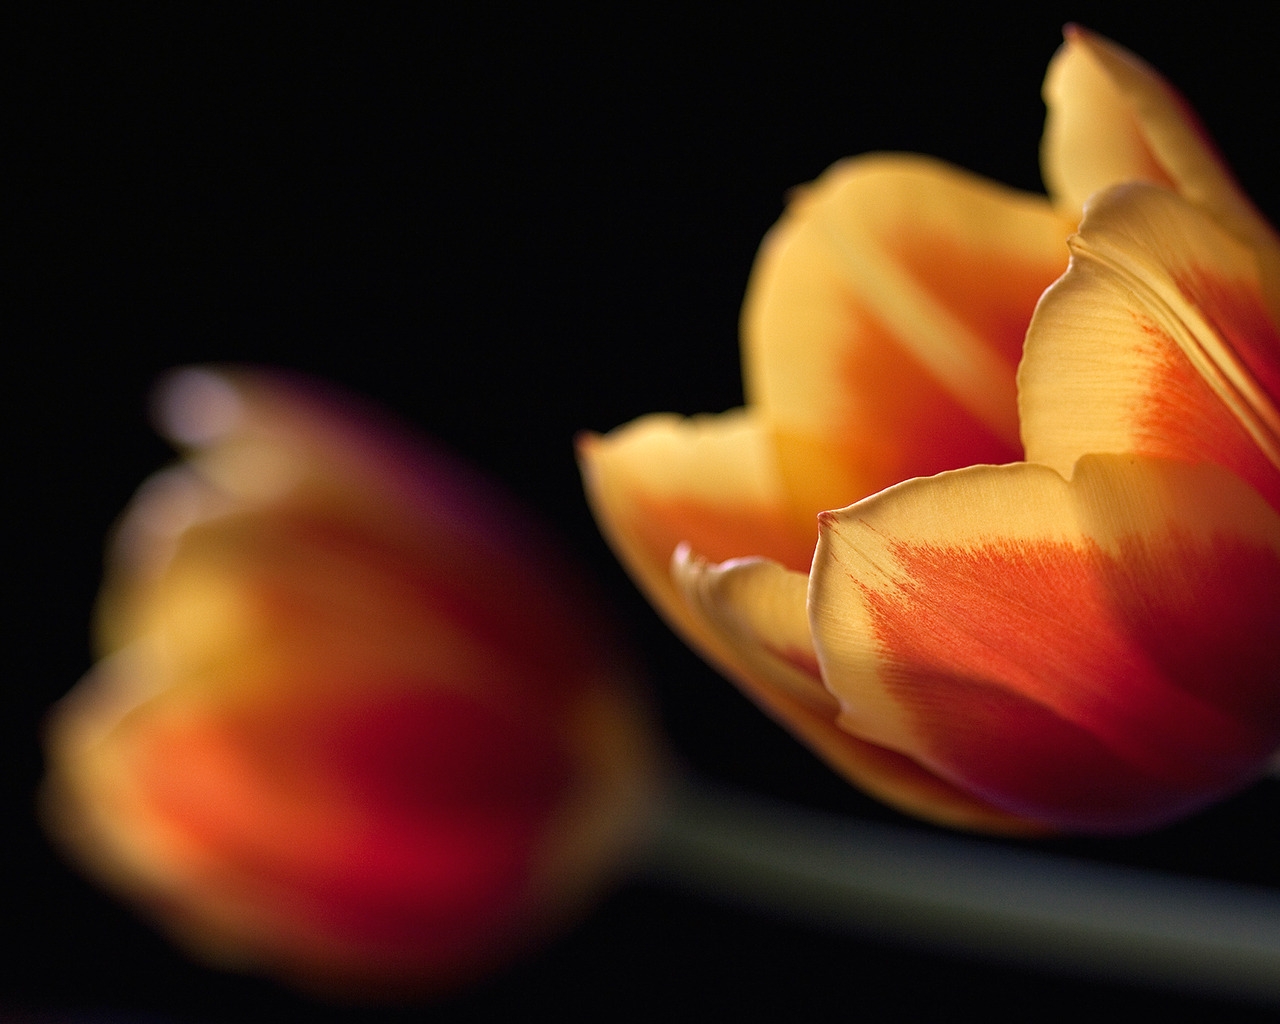 Tulips in orange for 1280 x 1024 resolution